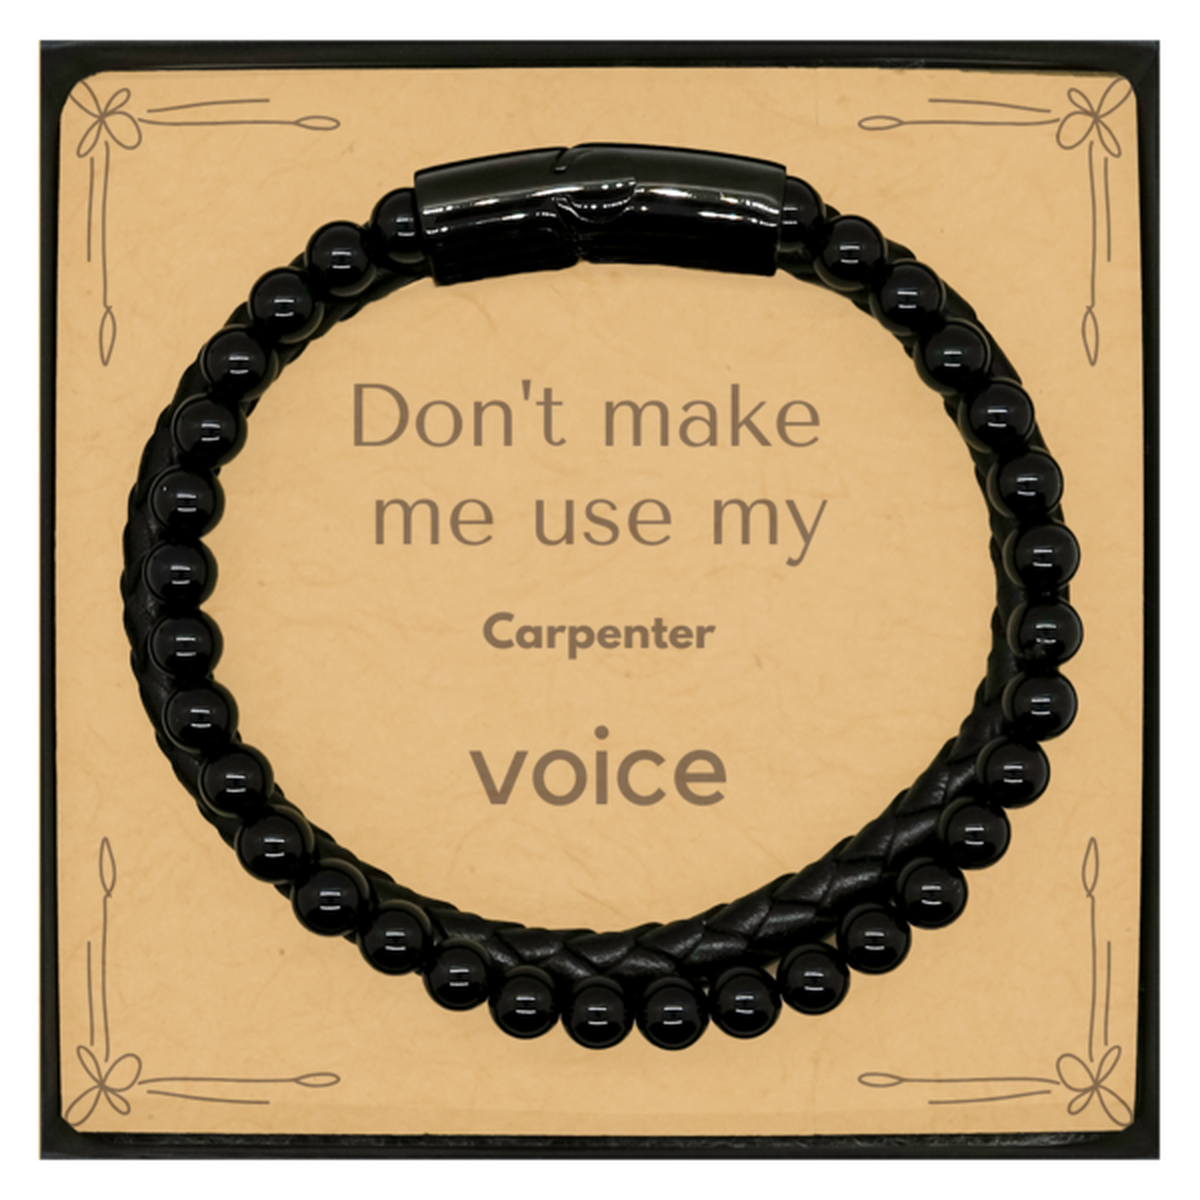 Don't make me use my Carpenter voice, Sarcasm Carpenter Card Gifts, Christmas Carpenter Stone Leather Bracelets Birthday Unique Gifts For Carpenter Coworkers, Men, Women, Colleague, Friends